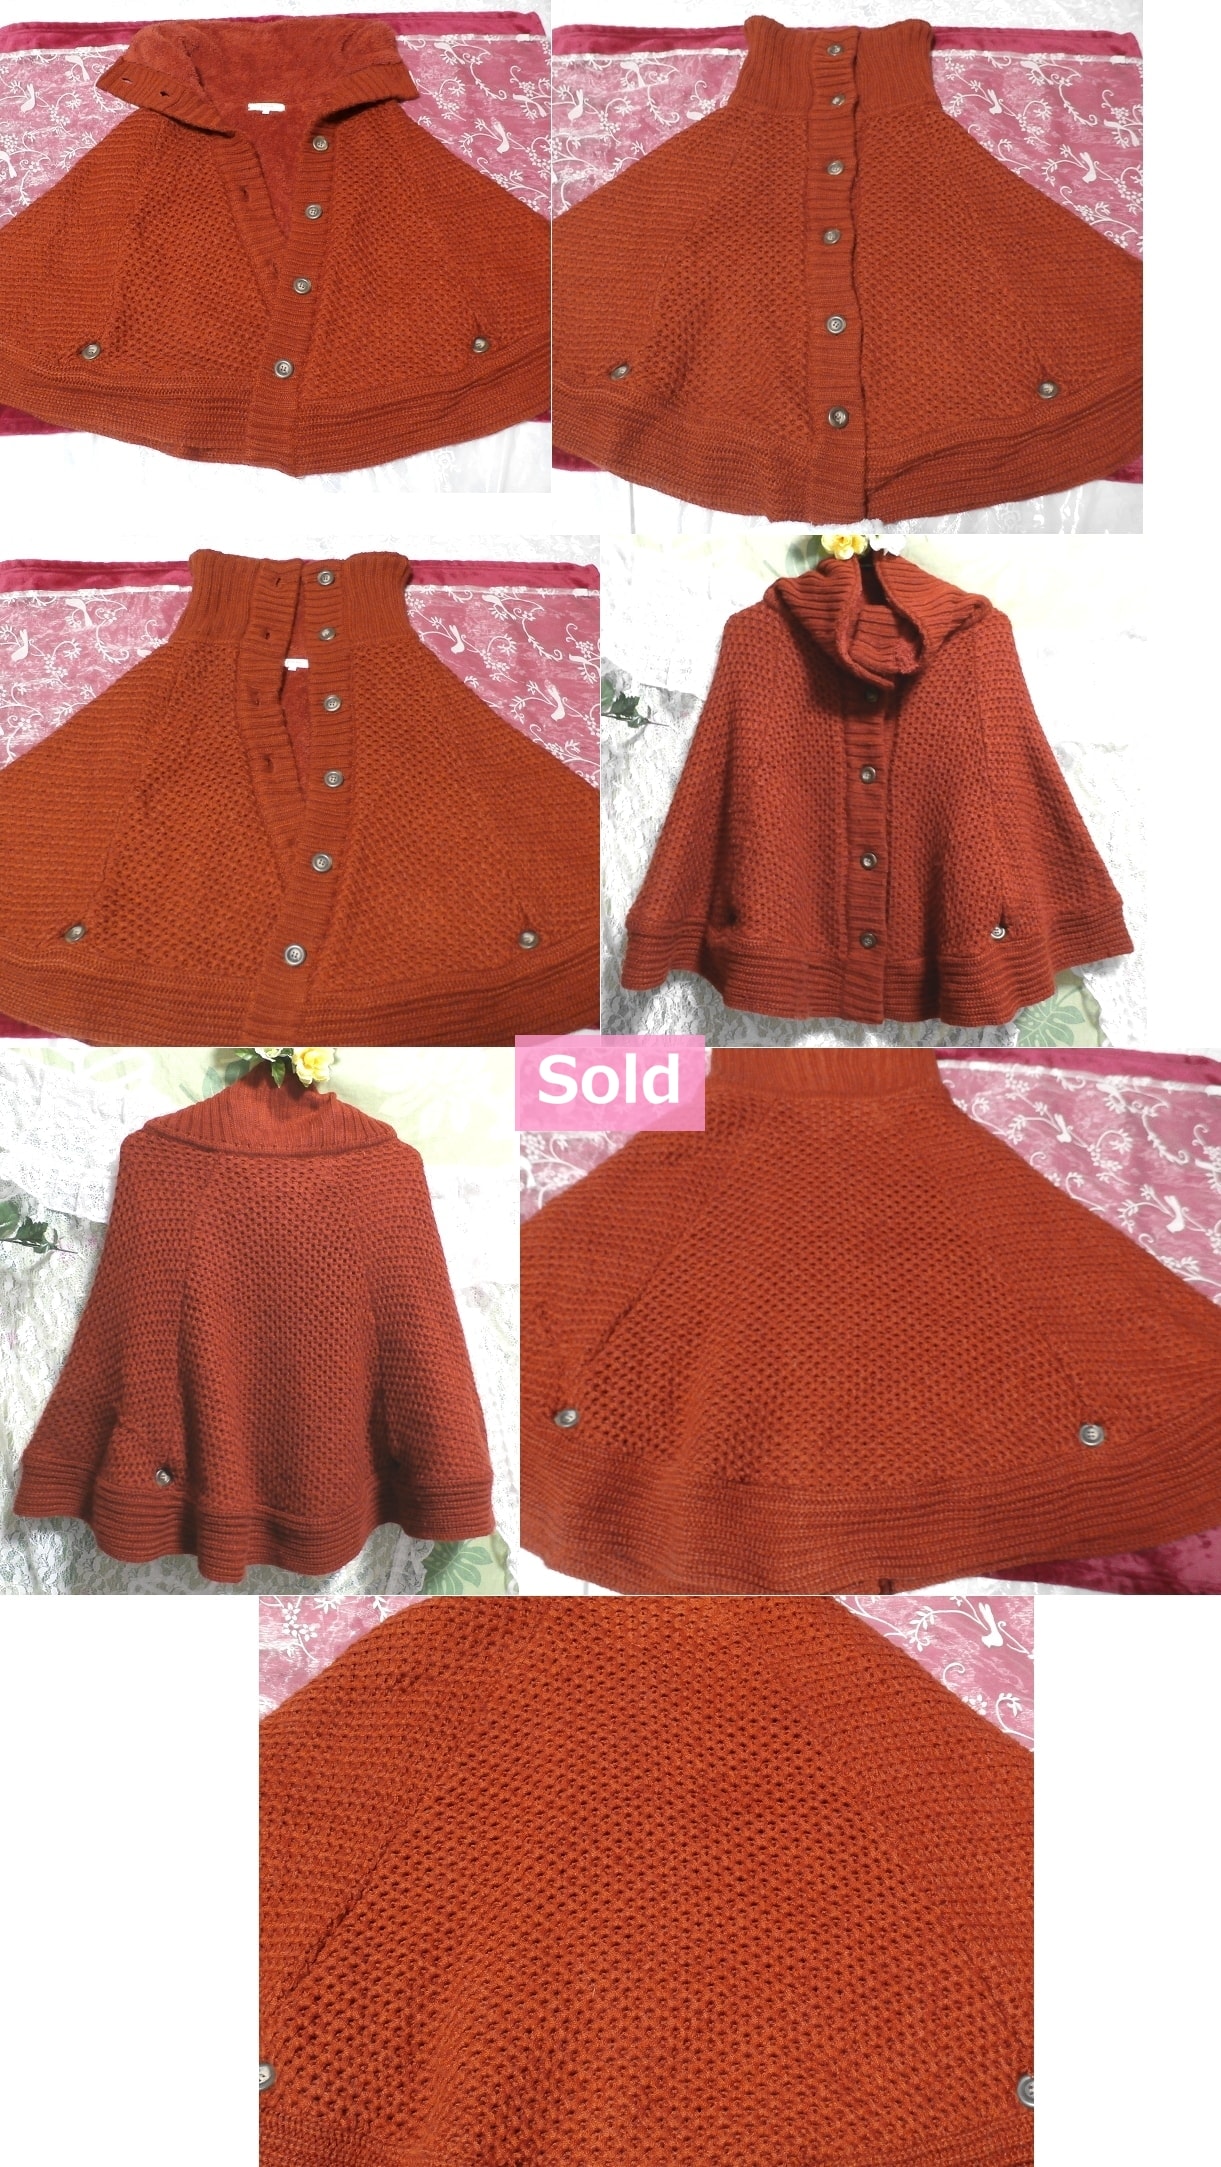 Red knit poncho / cape / mantle / cardigan red knit poncho / cape / mantle / cardigan